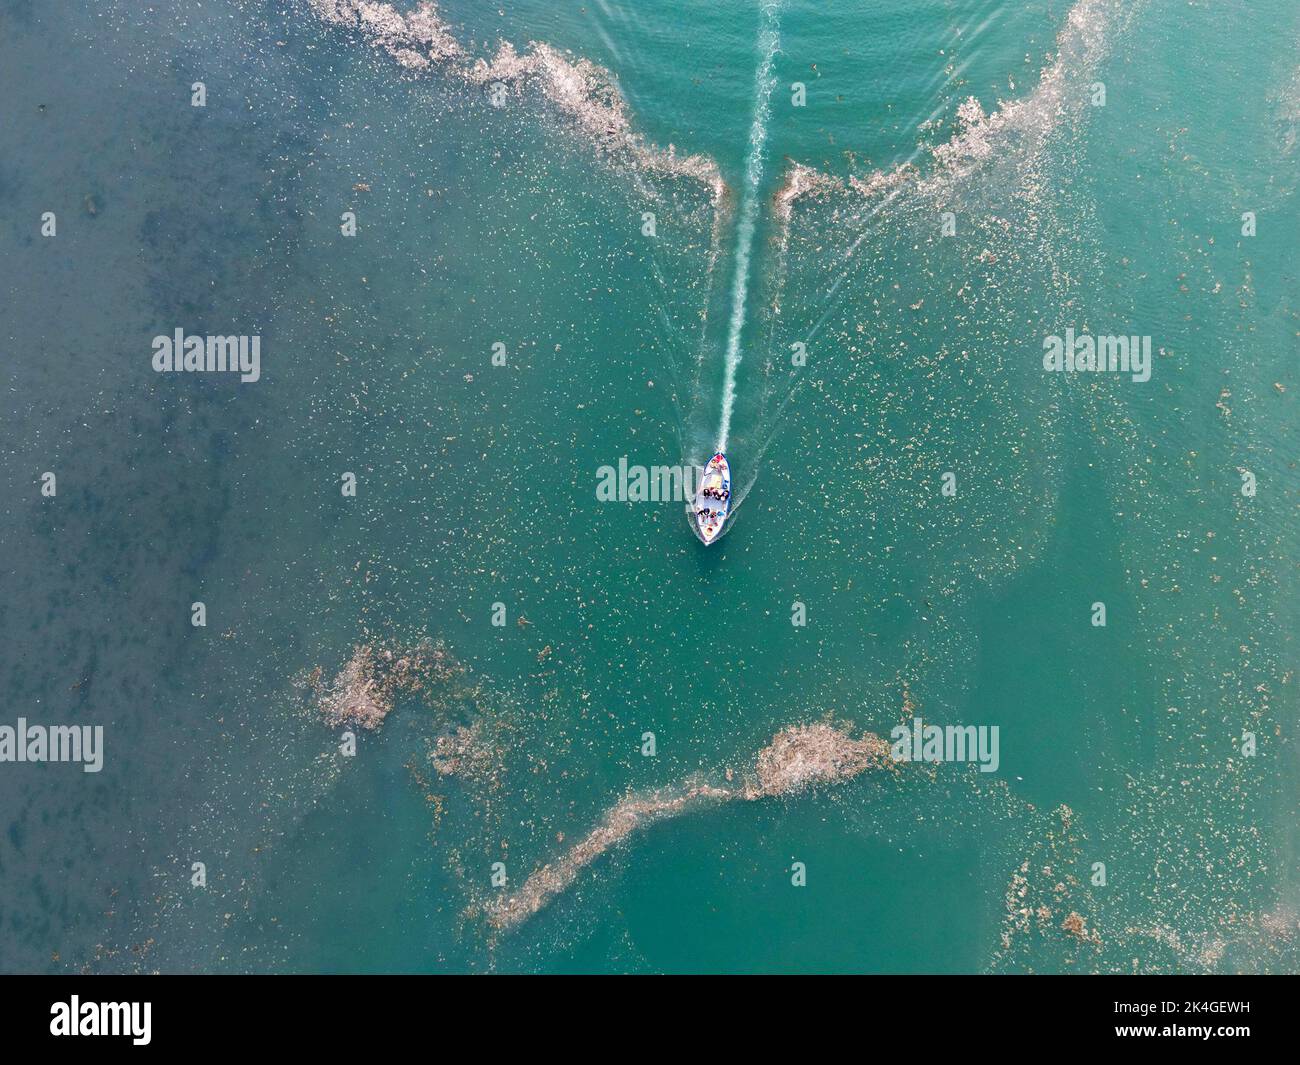 St Dogmael's, Pembrokeshire, Wales - August 2022: Overhead view of the pattern made by the wake of a small motor boat with people aboard Stock Photo